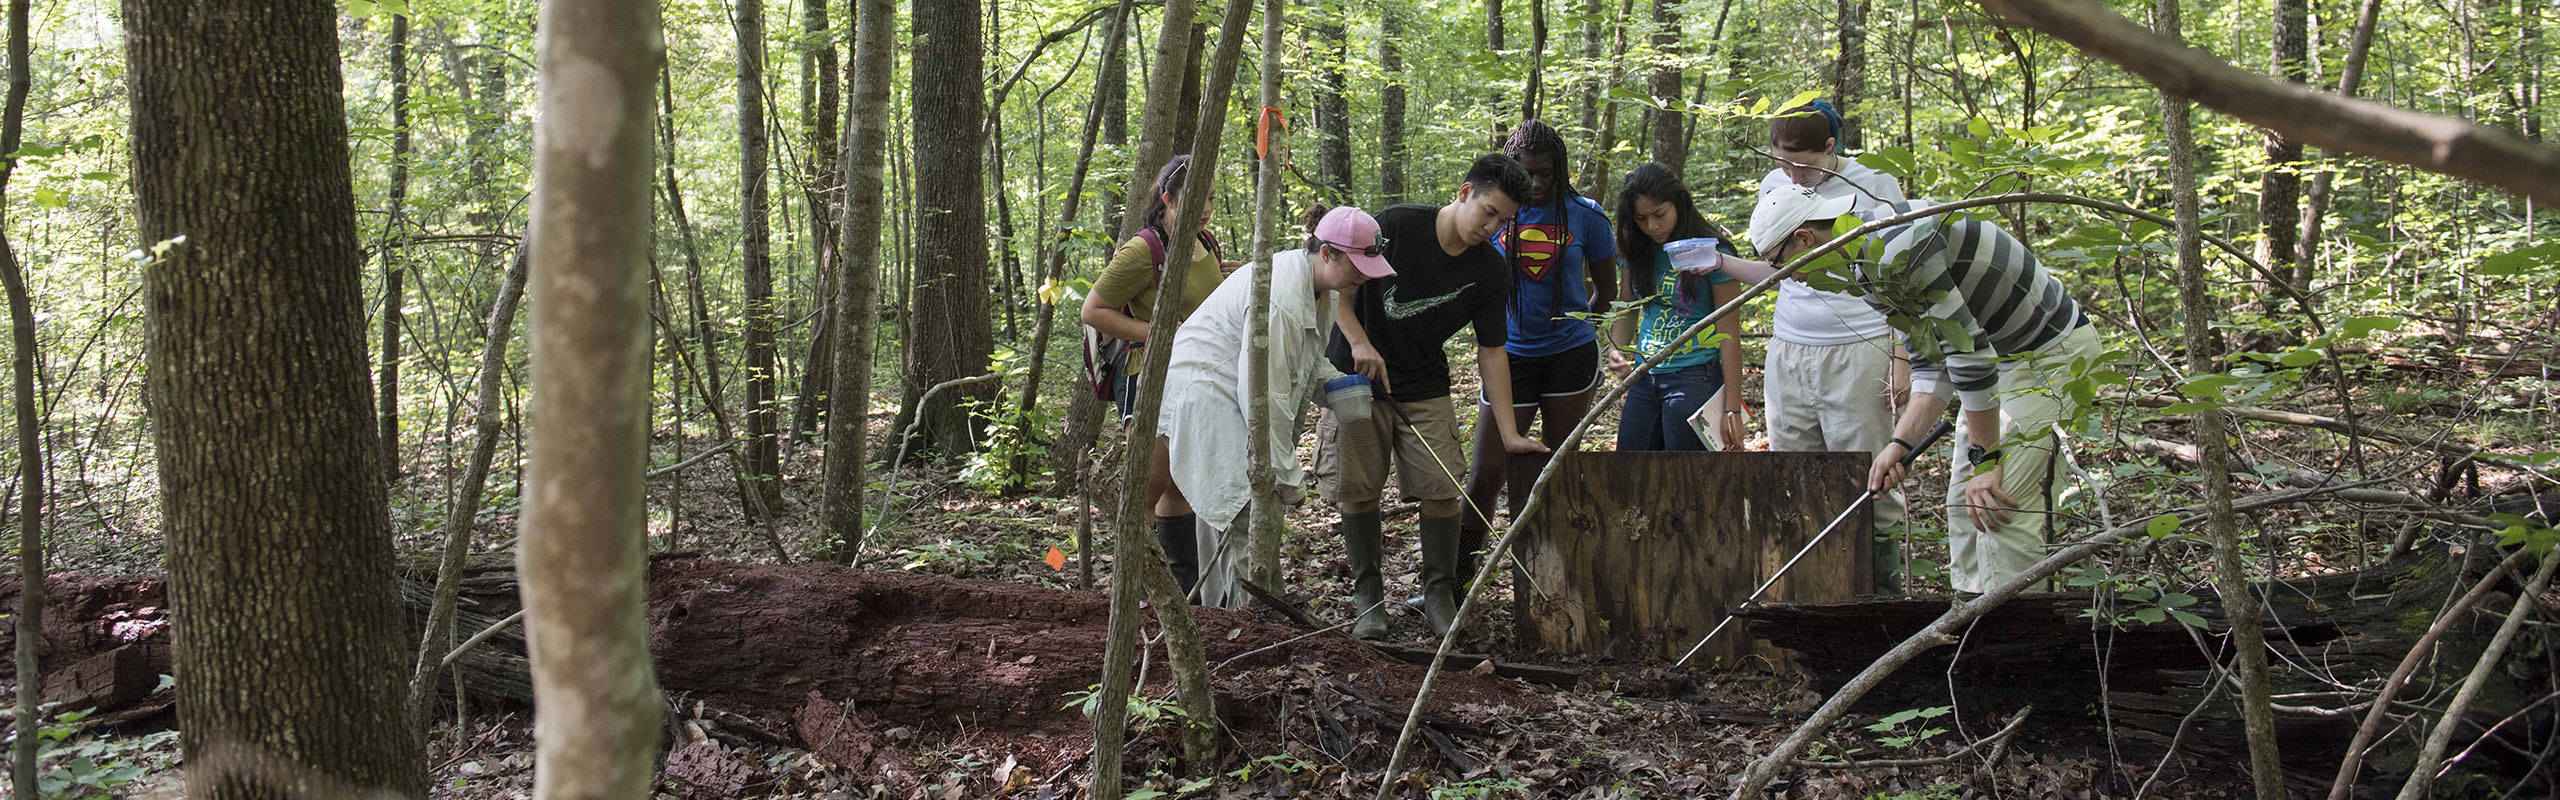 Elon Academy students studying herpetology with Lacey Huffling look for specimens in the Elon Forest during class.